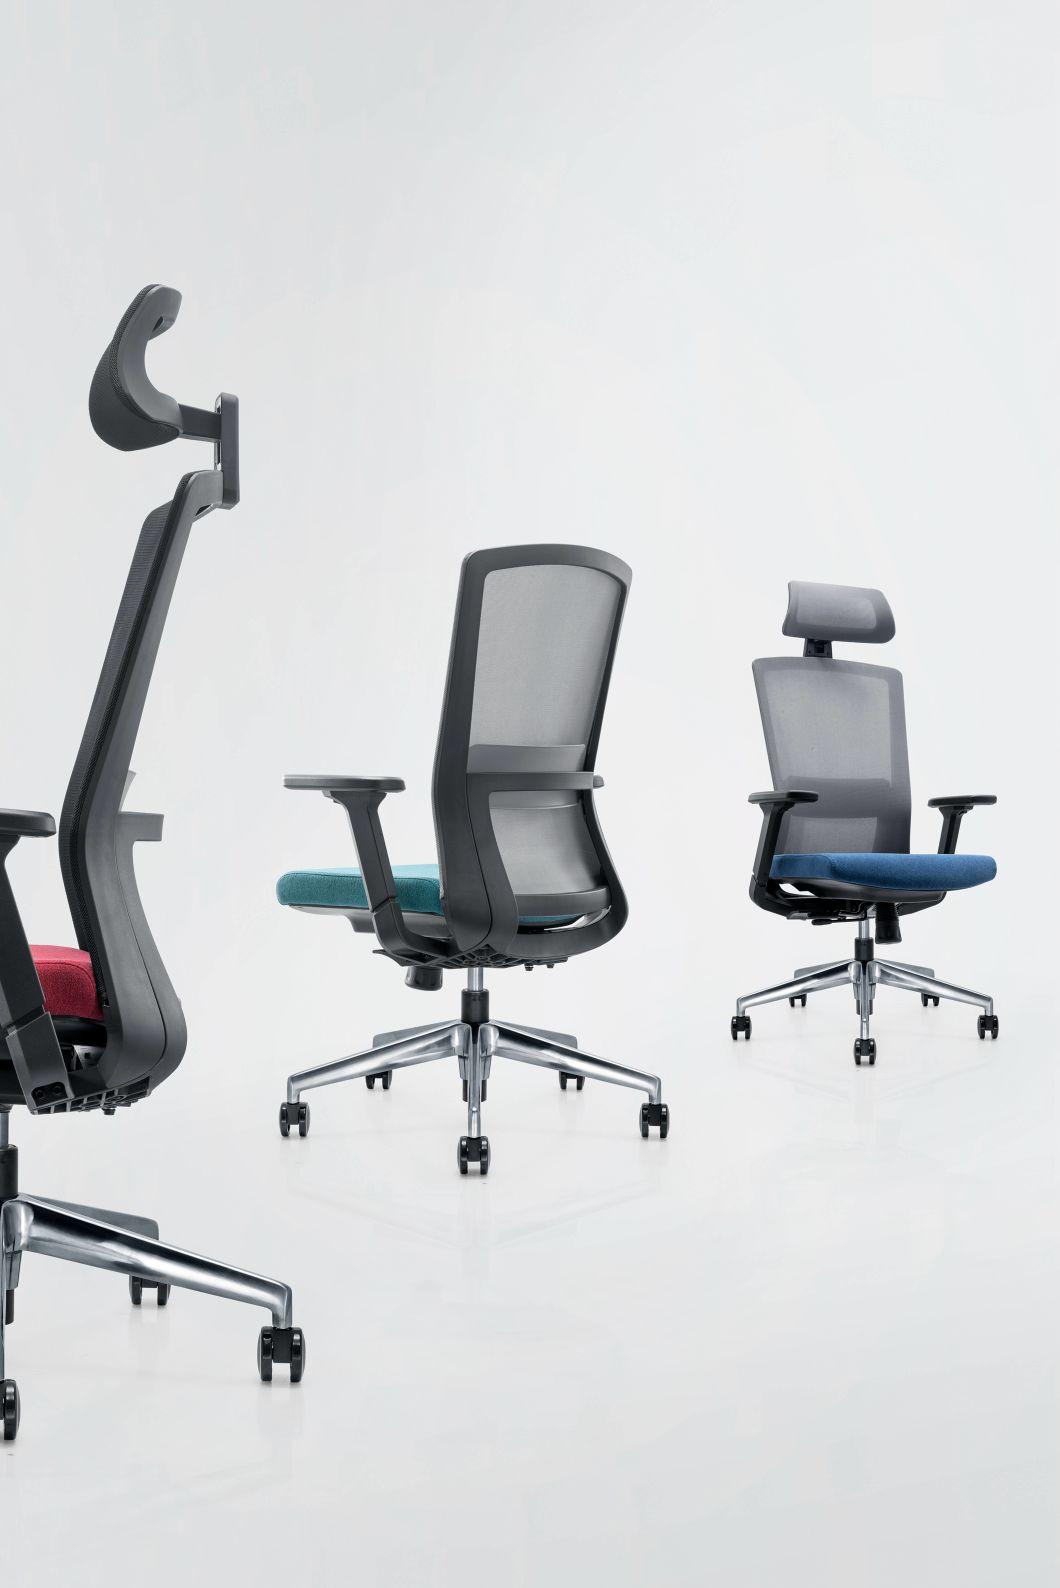 Hot Fabric Foshan Chairs Folding Computer Parts Game Boss Chair Office Furniture